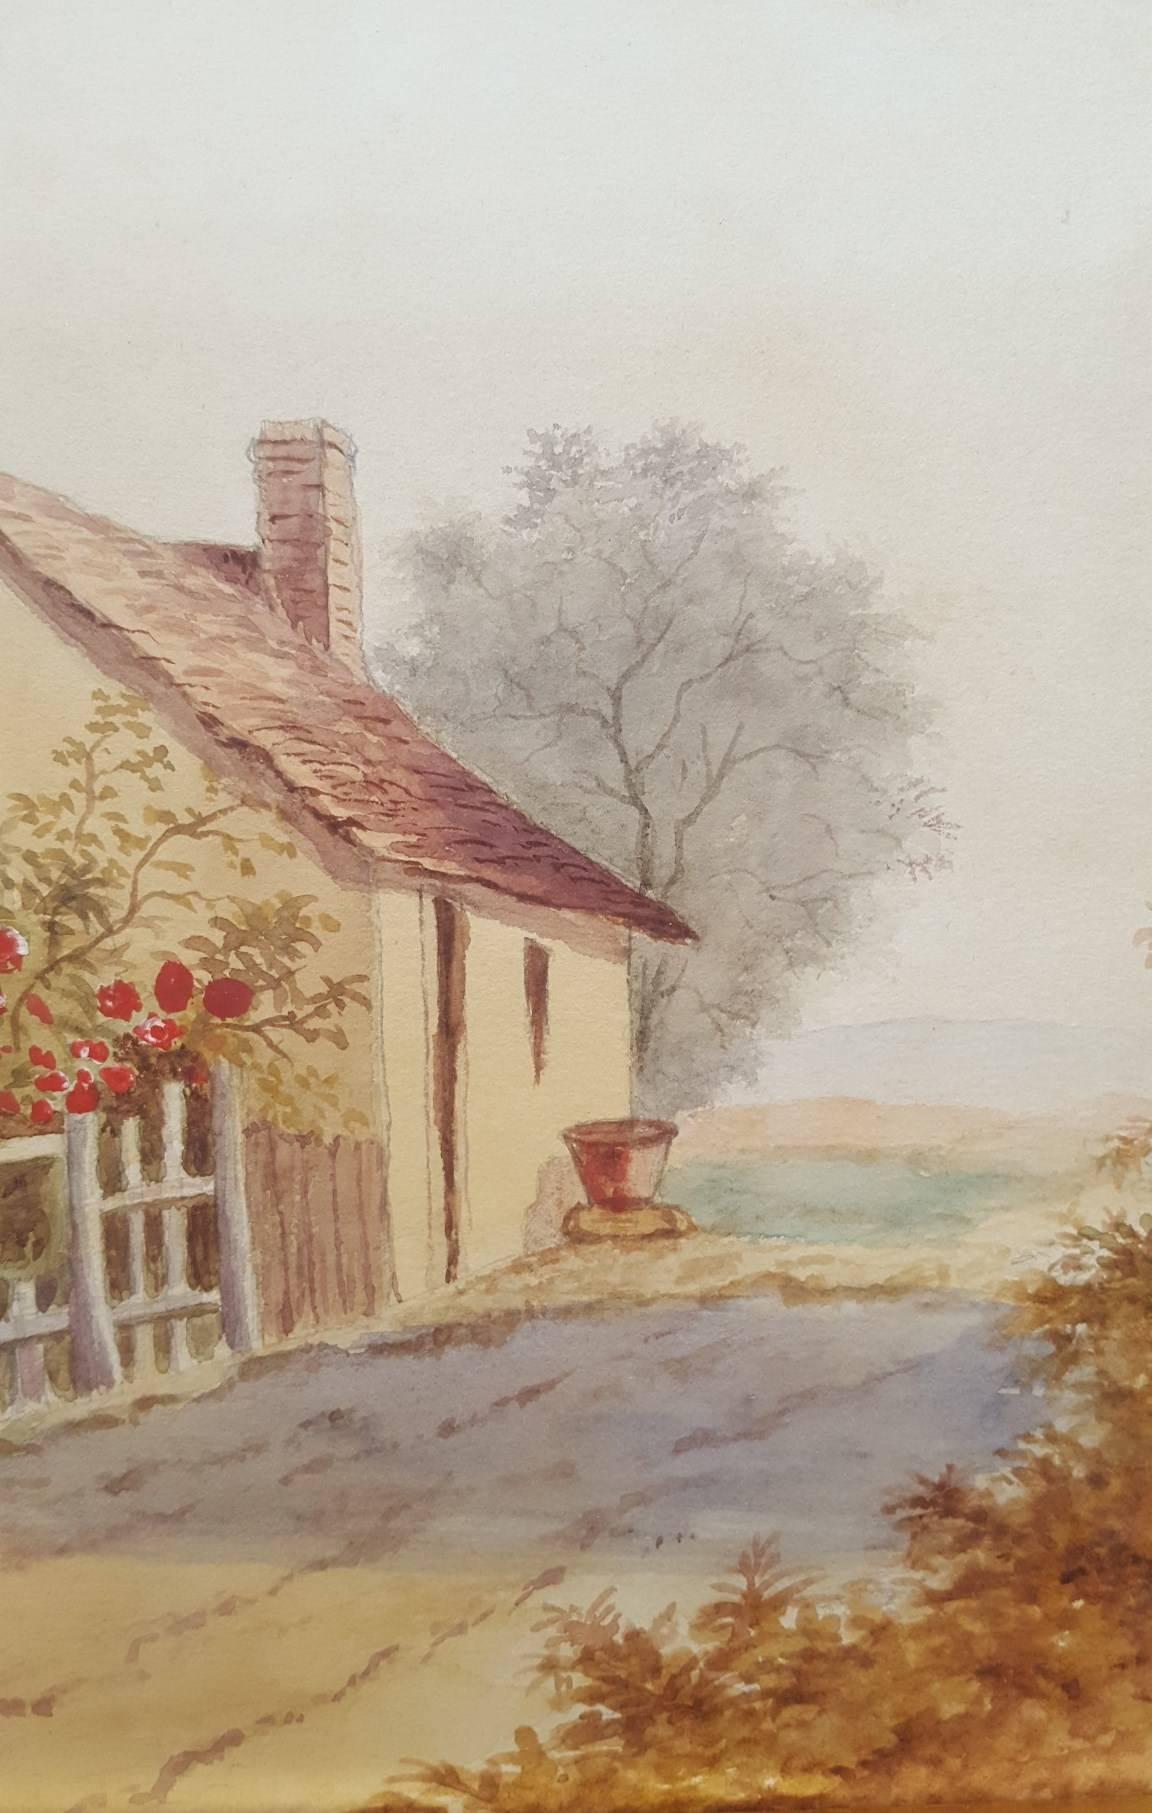 An original antique watercolor painting on paper by an unknown British artist titled 